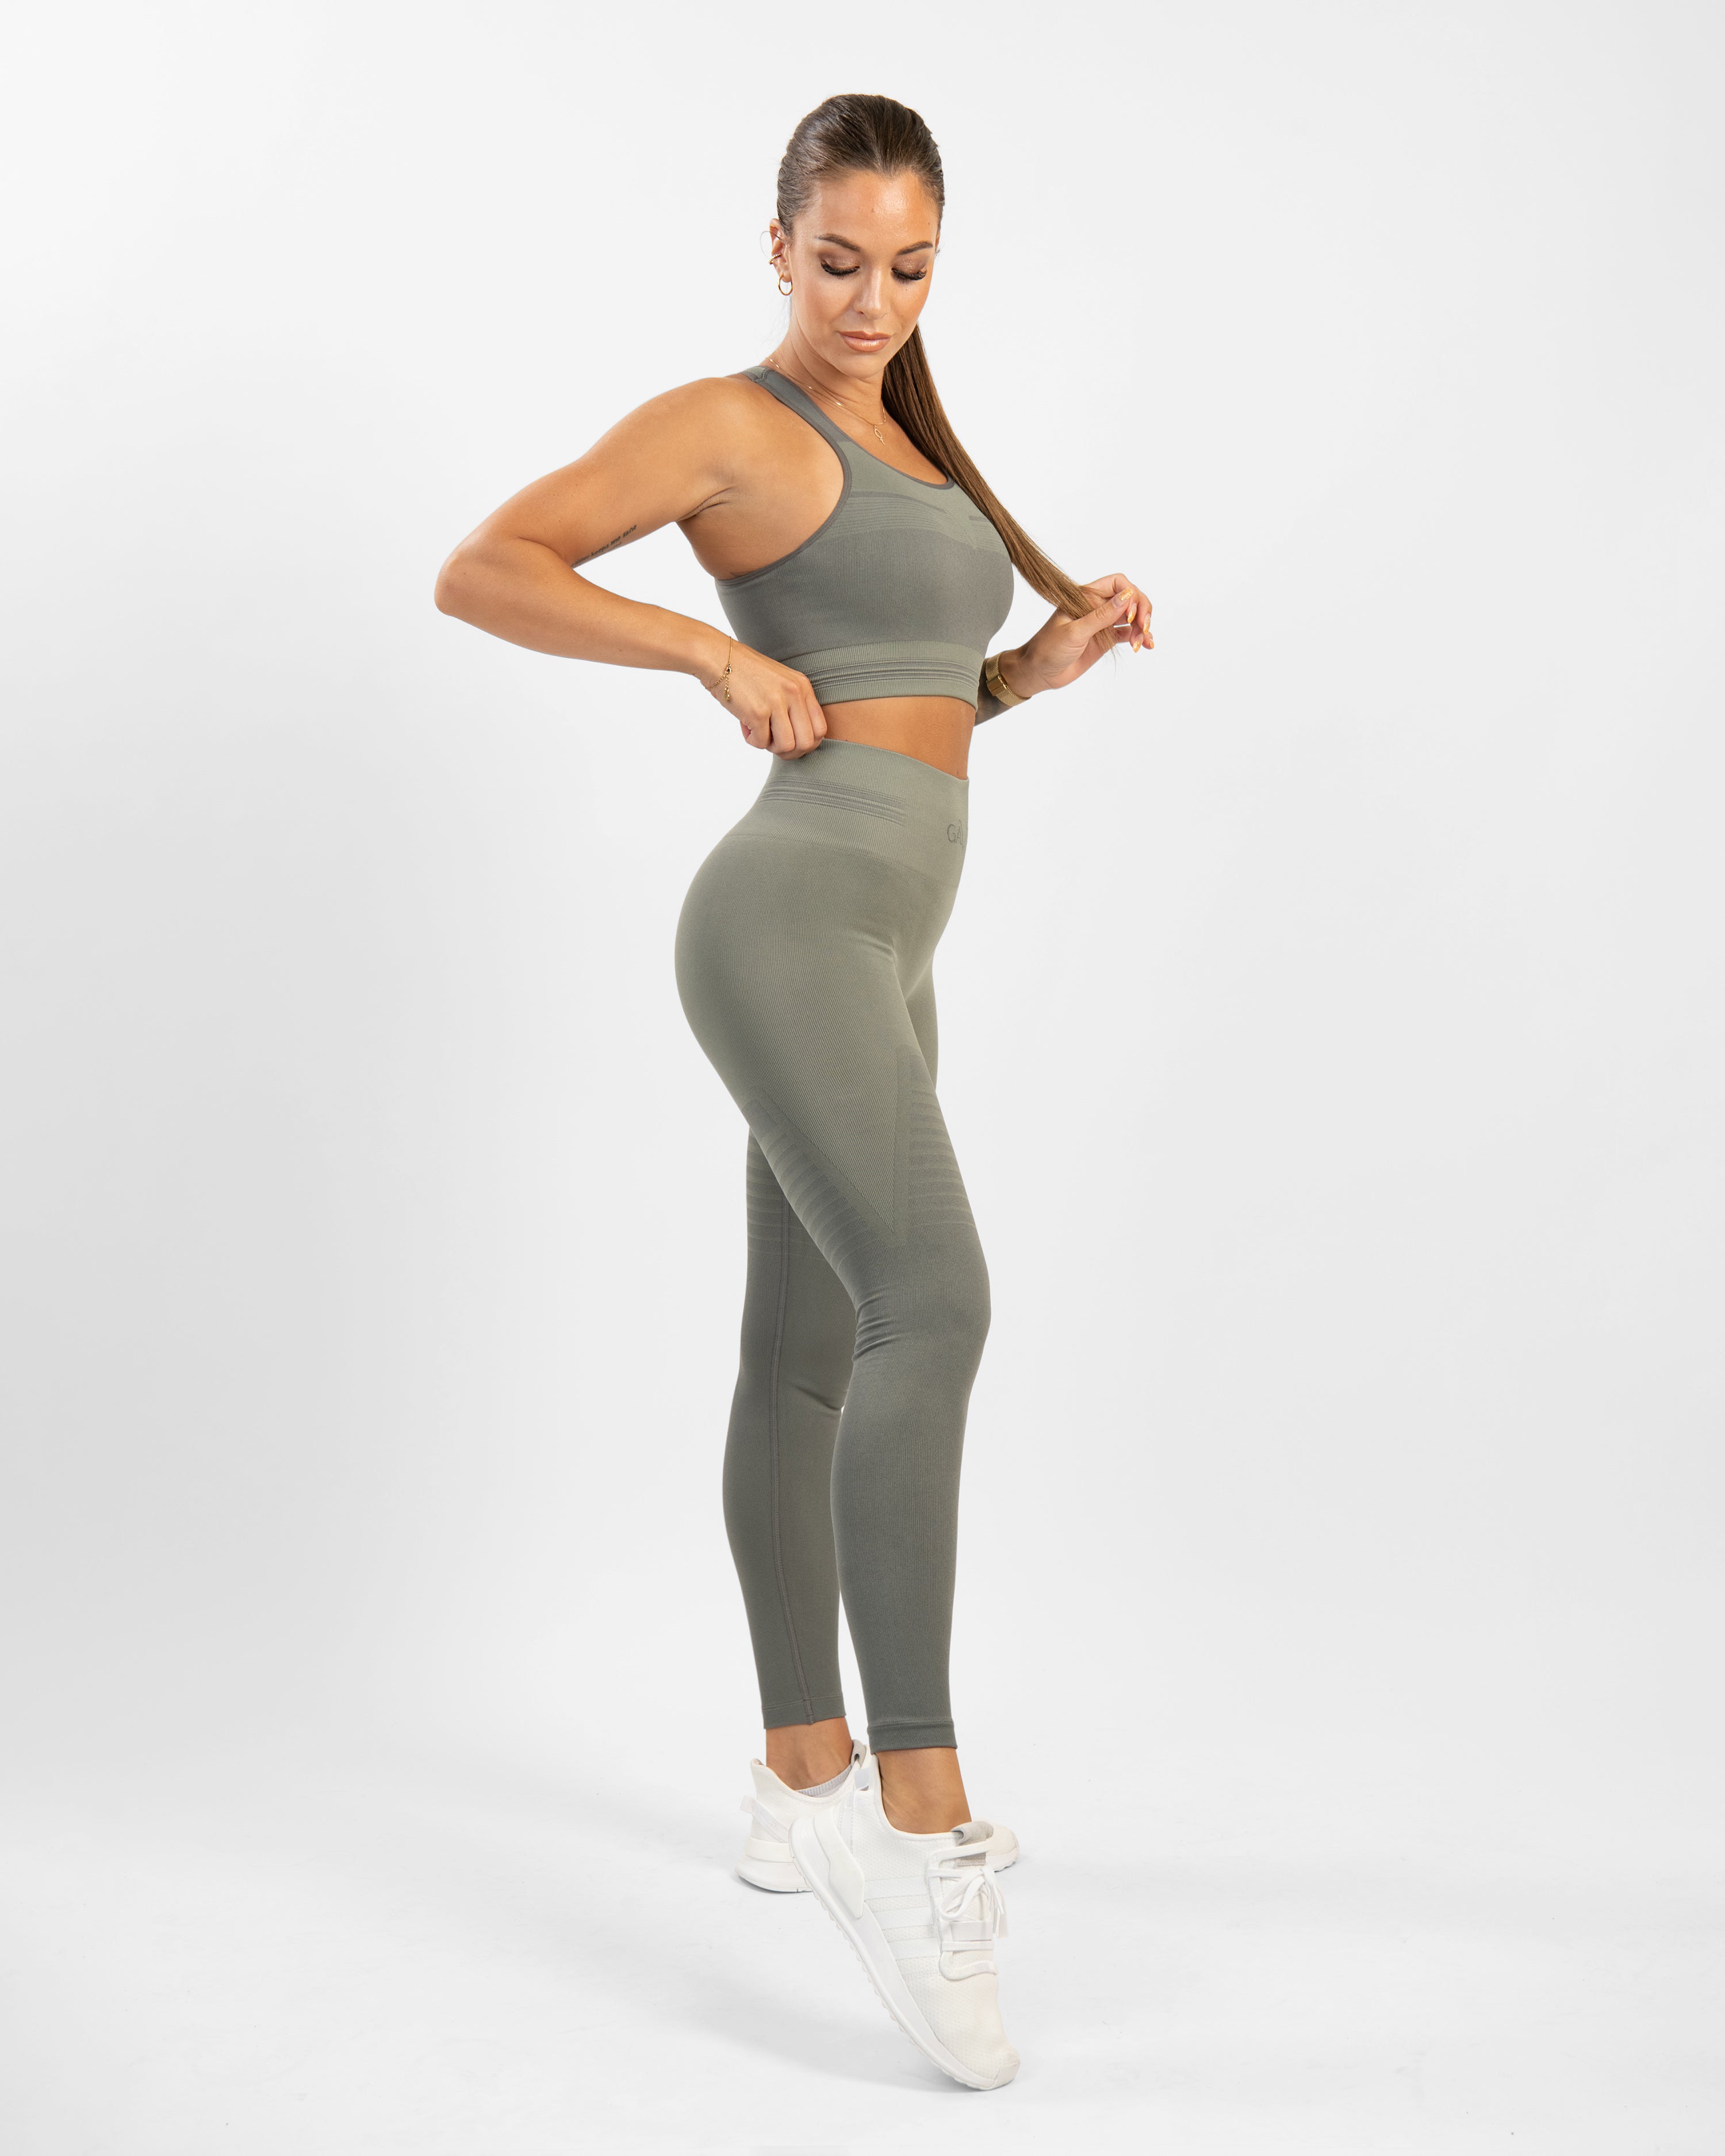 GAVELO Pulse Nude Olive Gray Seamless Tights